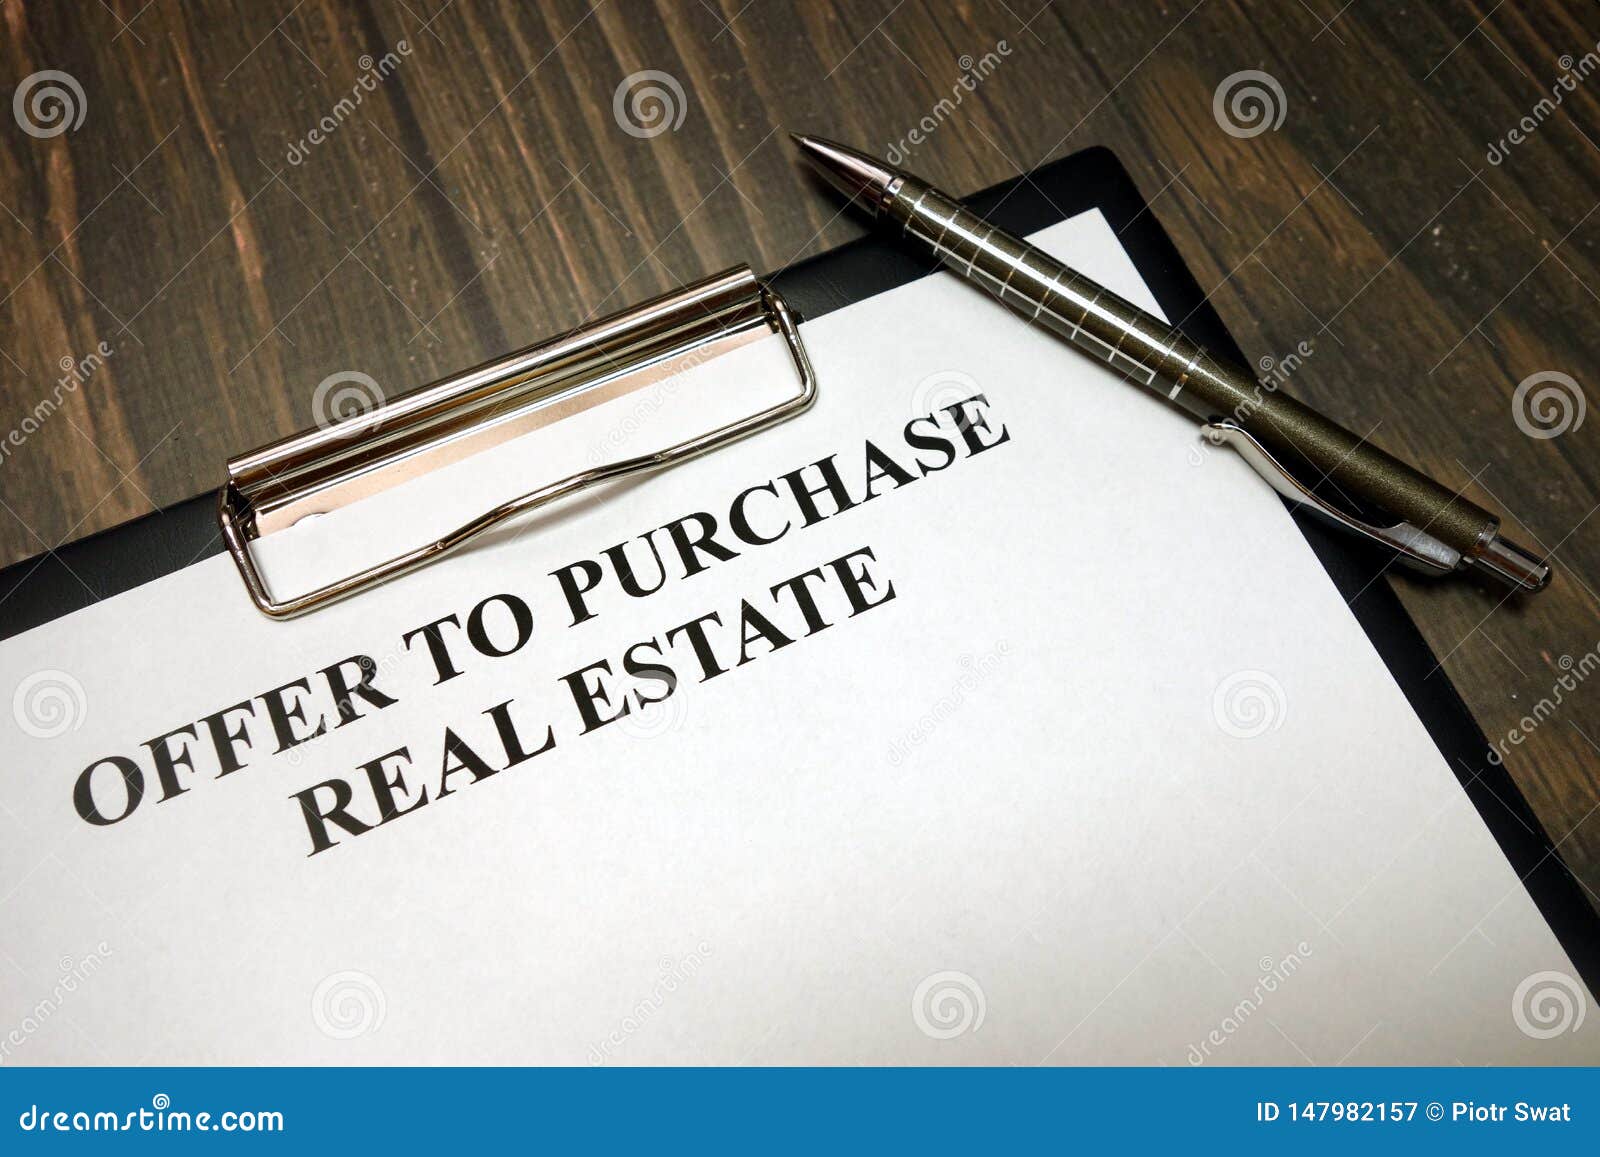 clipboard with offer to purchase real estate mockup and pen on desk